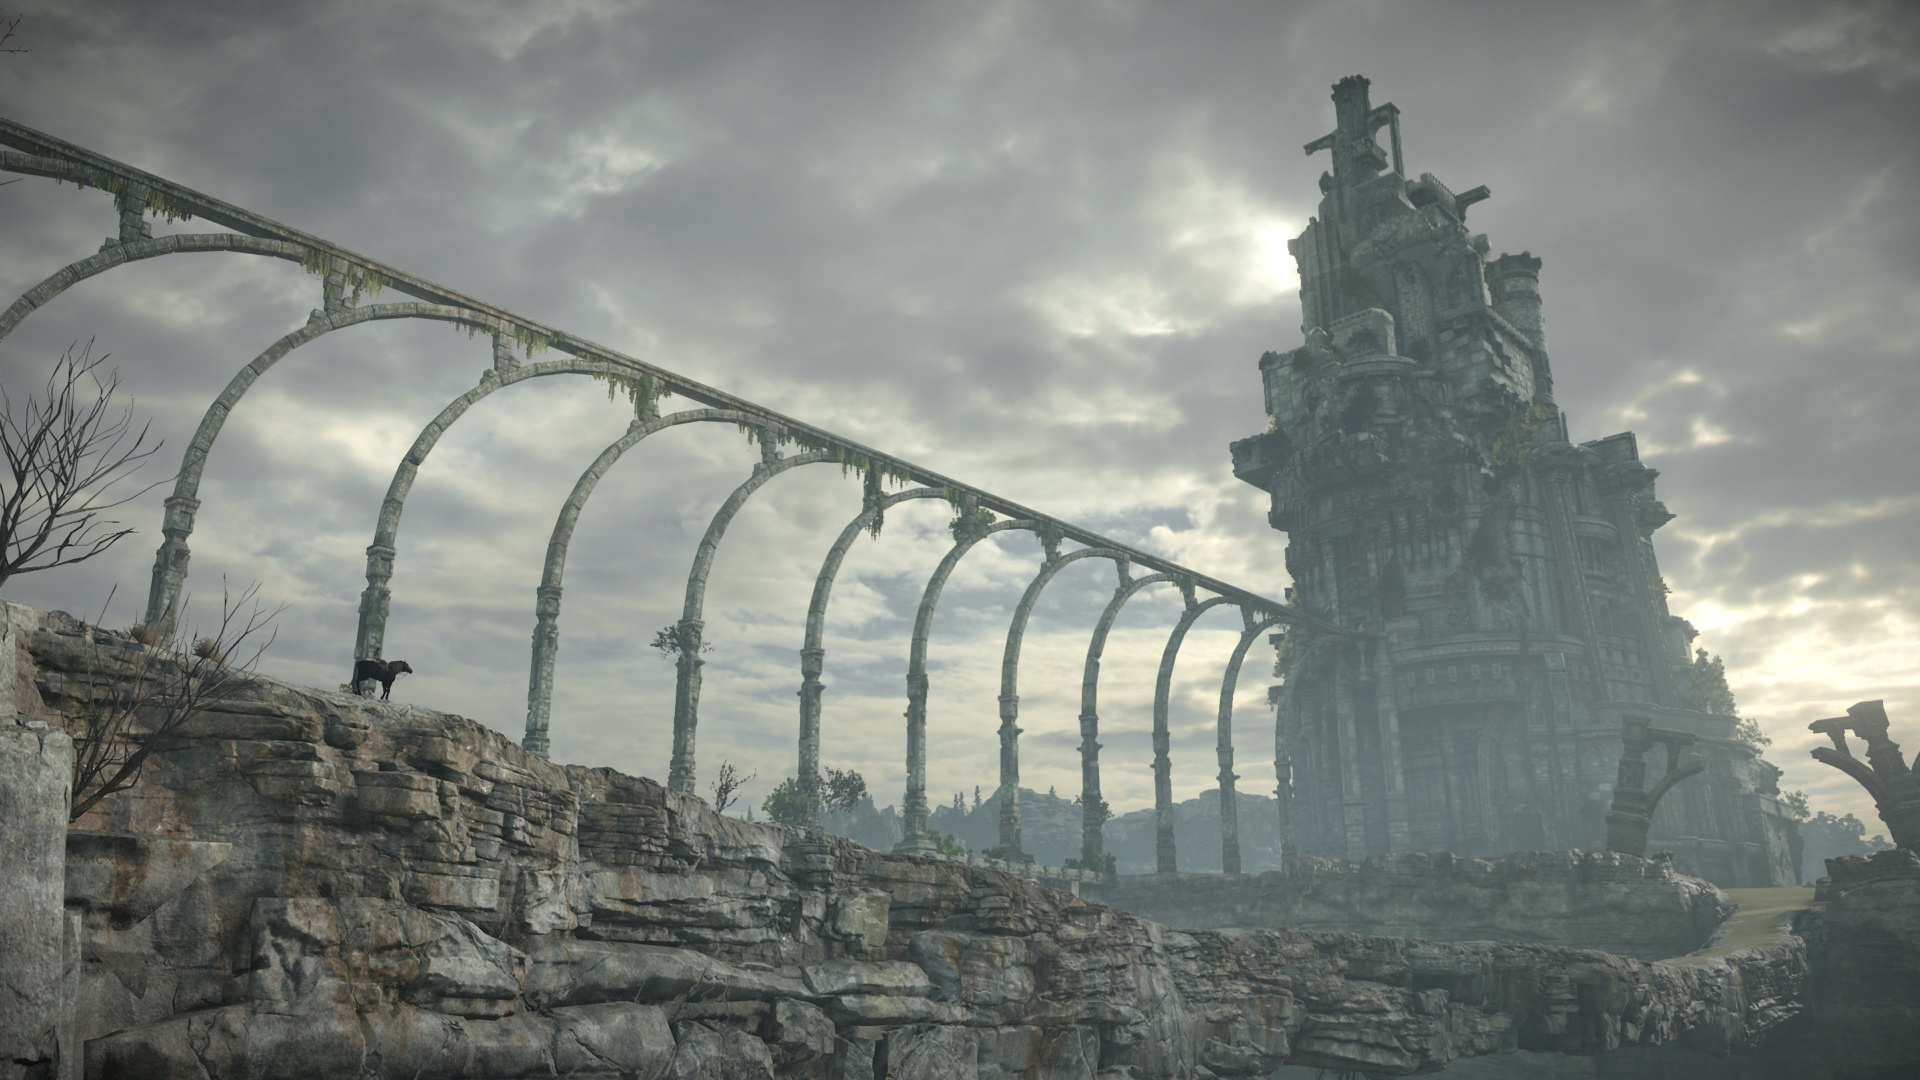 Shadow of The Colossus, Playstation 4, Remake, Bridge, Architecture. Wallpaper in 1920x1080 Resolution